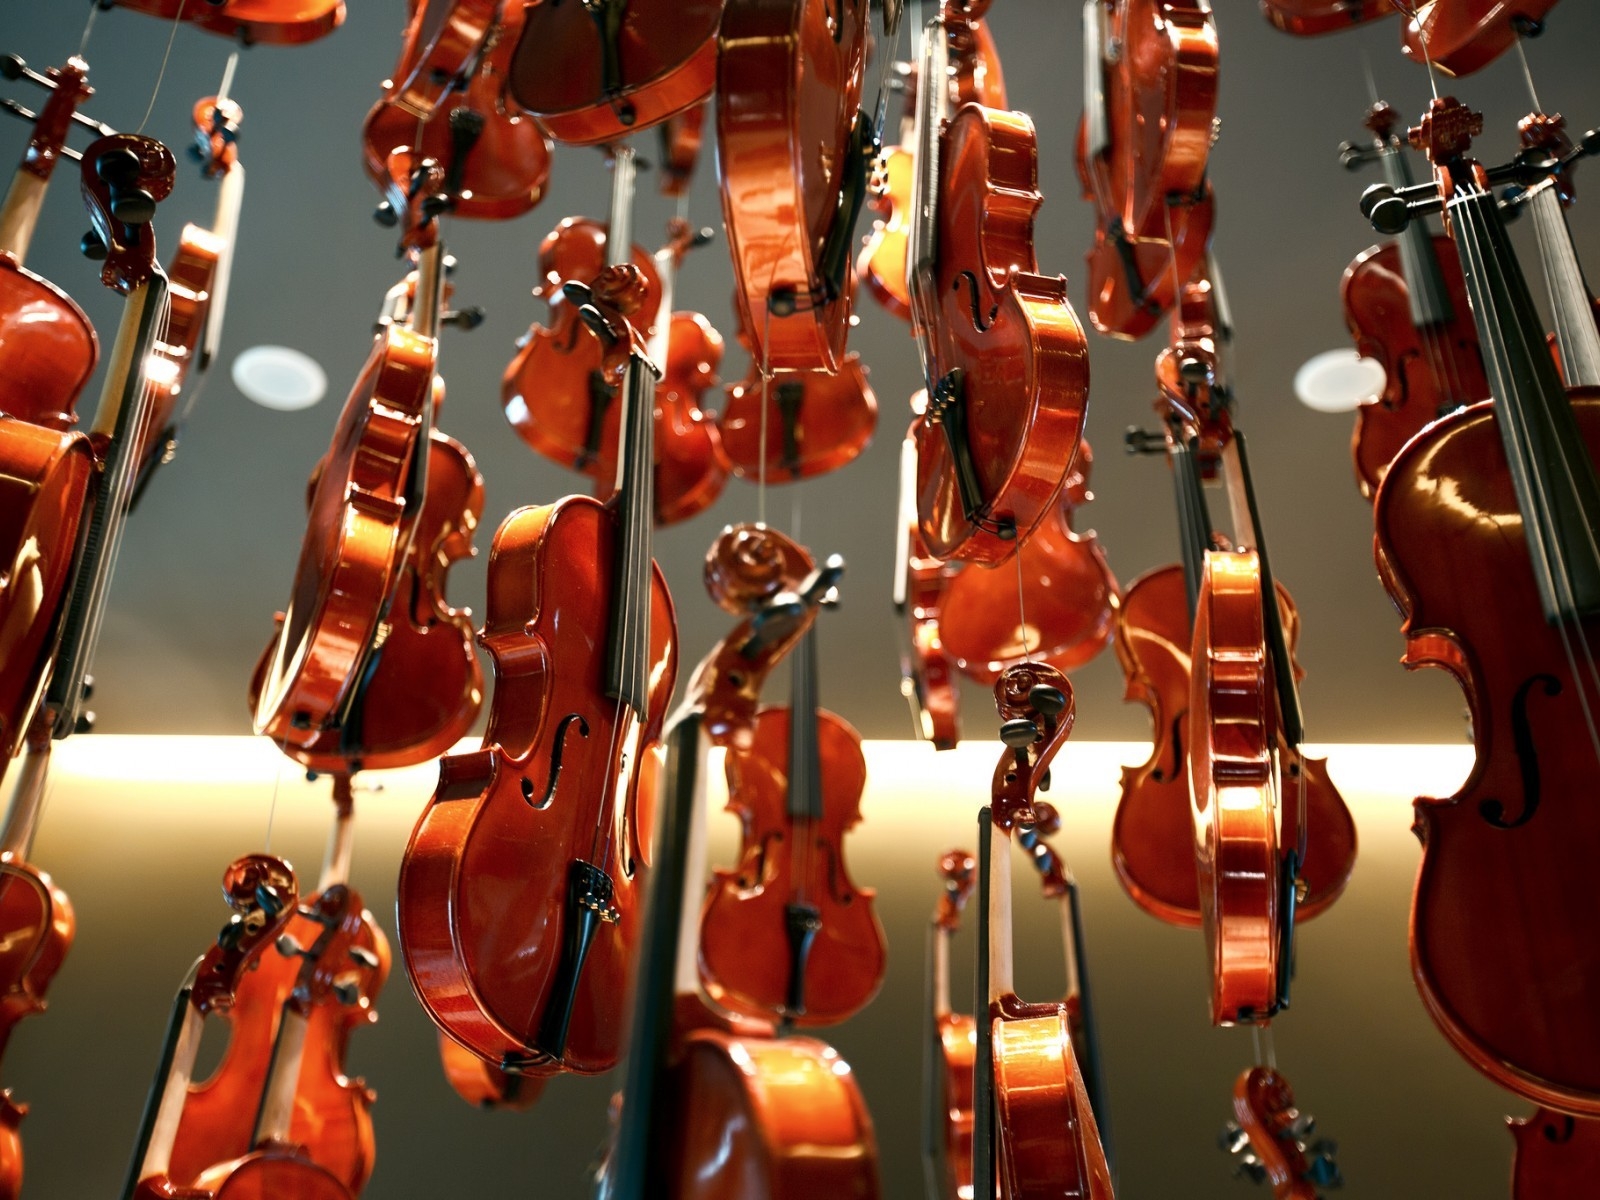 New Violins for 1600 x 1200 resolution